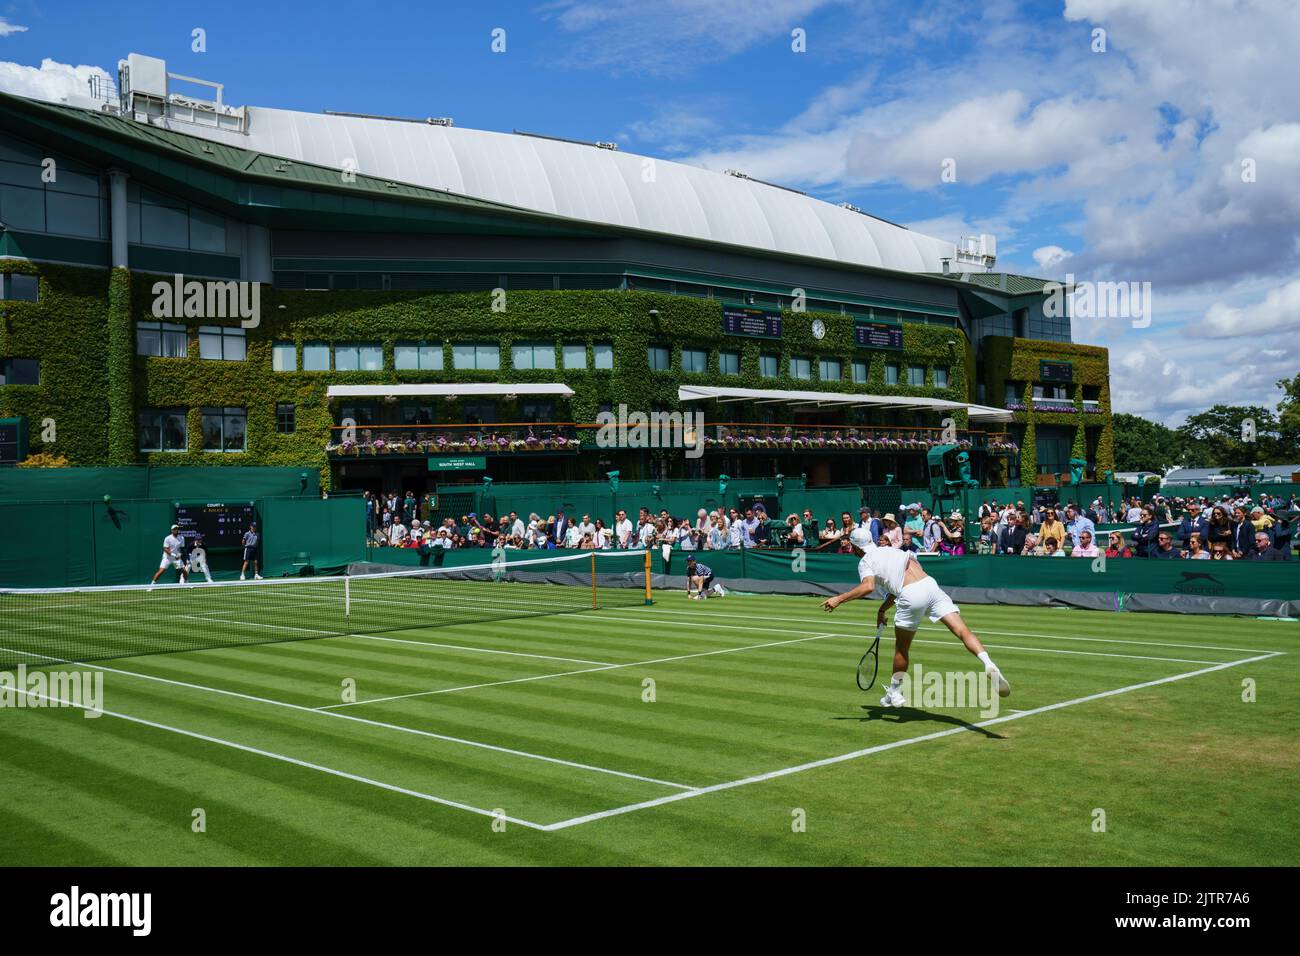 General Views of Tommy Paul and Fernando Verdasco on Court 4 at The Championships 2022. Held at The All England Lawn Tennis Club, Wimbledon. Stock Photo